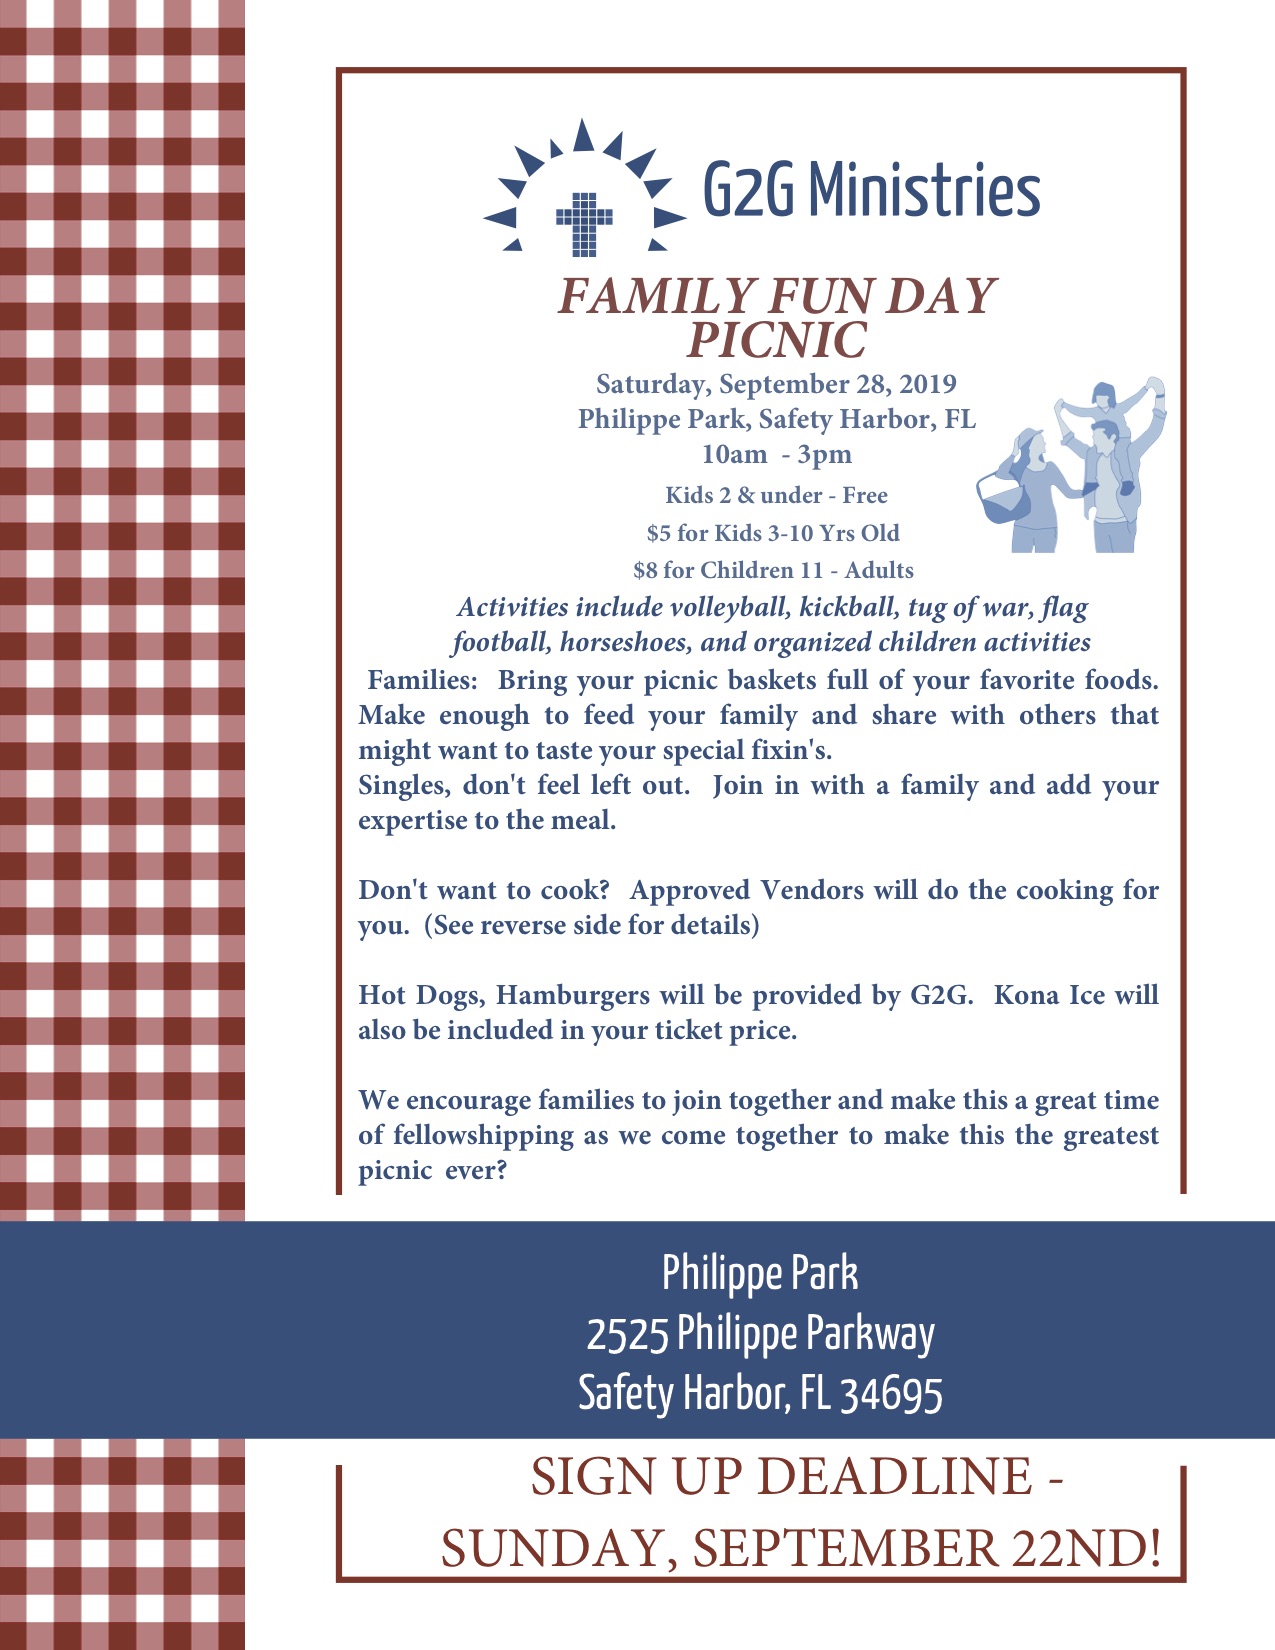 2019 Family Fun Day Picnic @ Philippe Park | Safety Harbor | Florida | United States